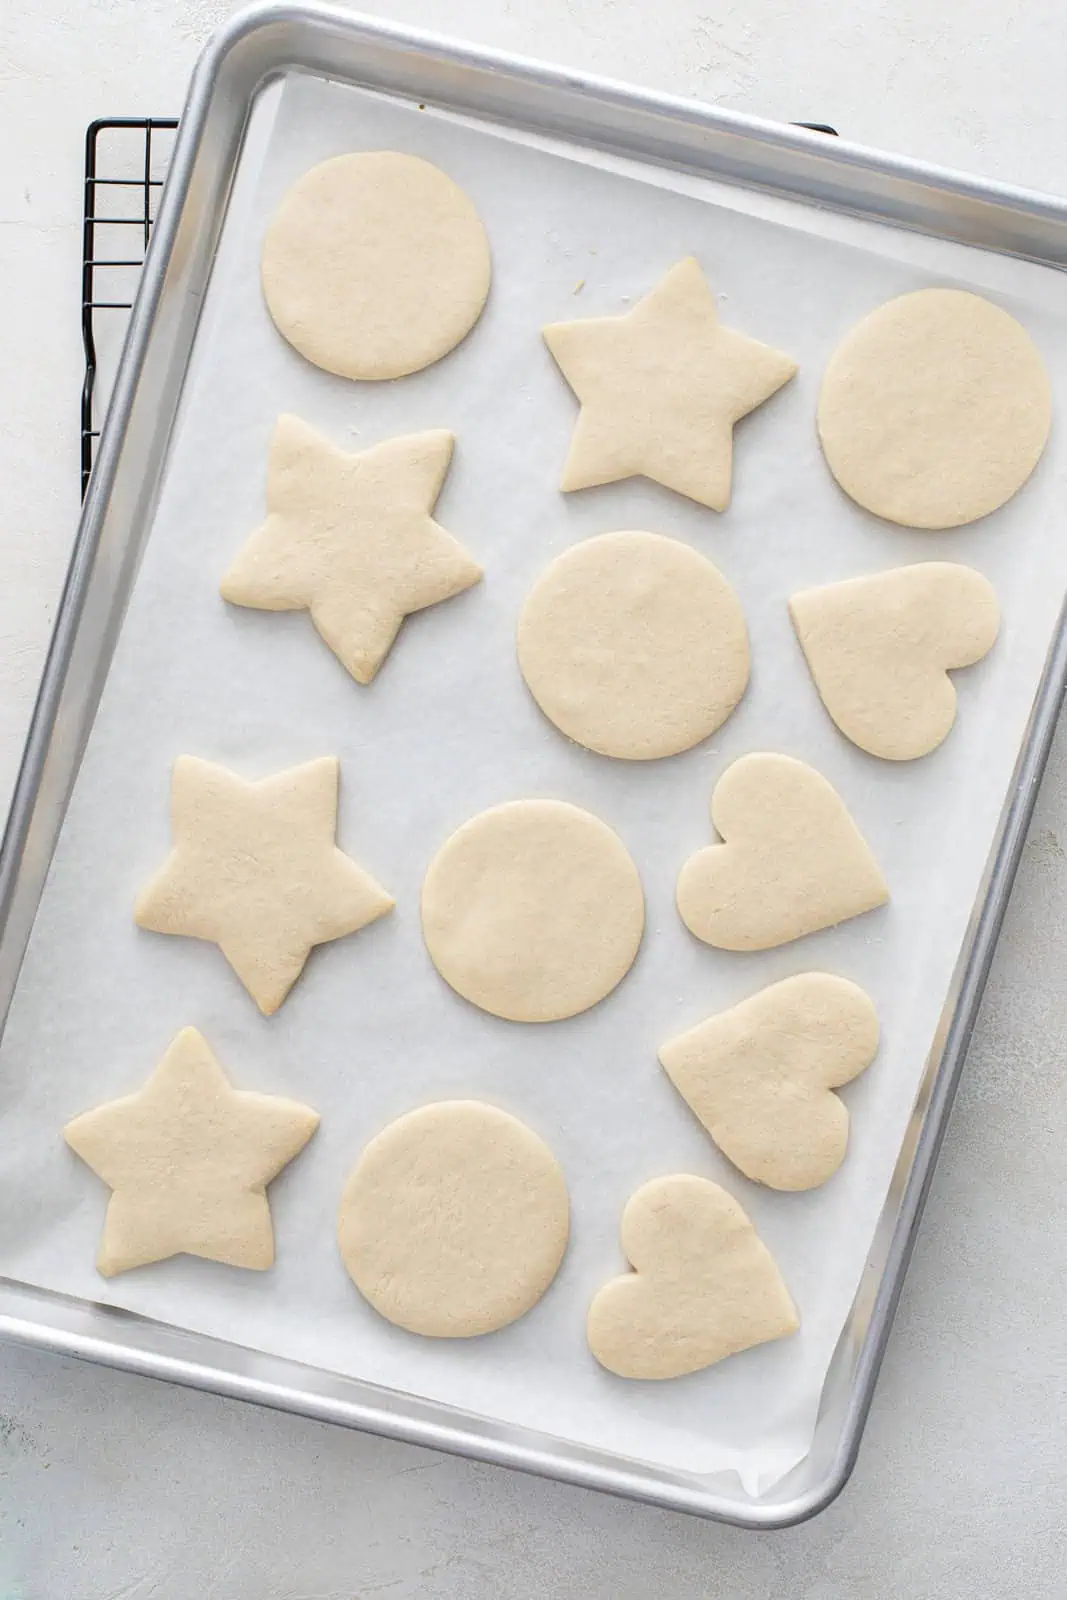 Baked no chill sugar cookies on a parchment-lined baking sheet.